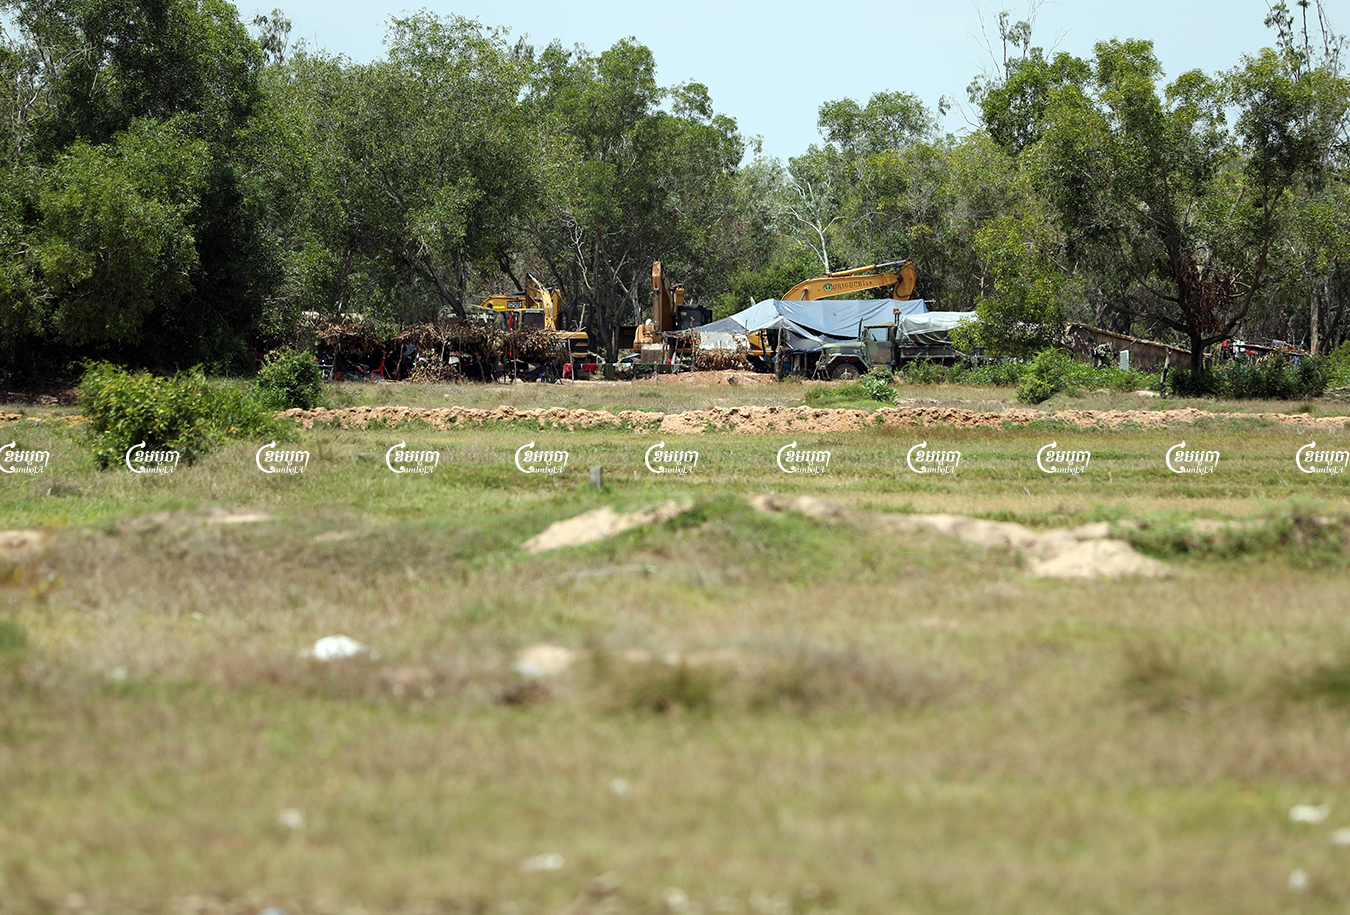 Soldiers set up a tent along with a number of excavators and bulldozers in a disputed land site in Kandal province's Ang Snuol district, June 4, 2021.CamboJA/ Pring Samrang